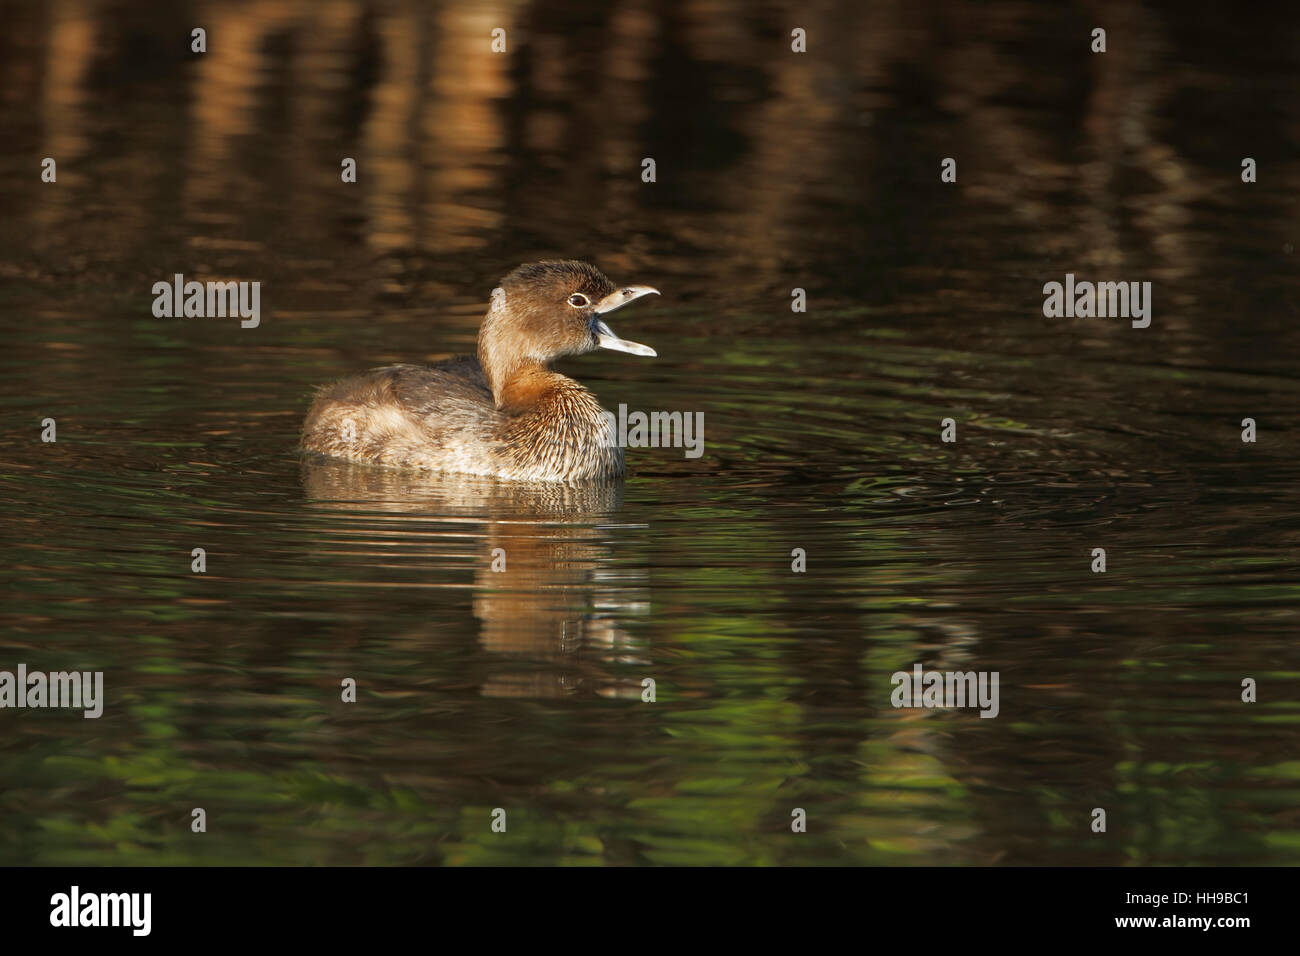 Pied-billed grebe (Podilymbus podiceps) in water with open beak in early morning light, Ding Darling NWR, Florida, USA Stock Photo